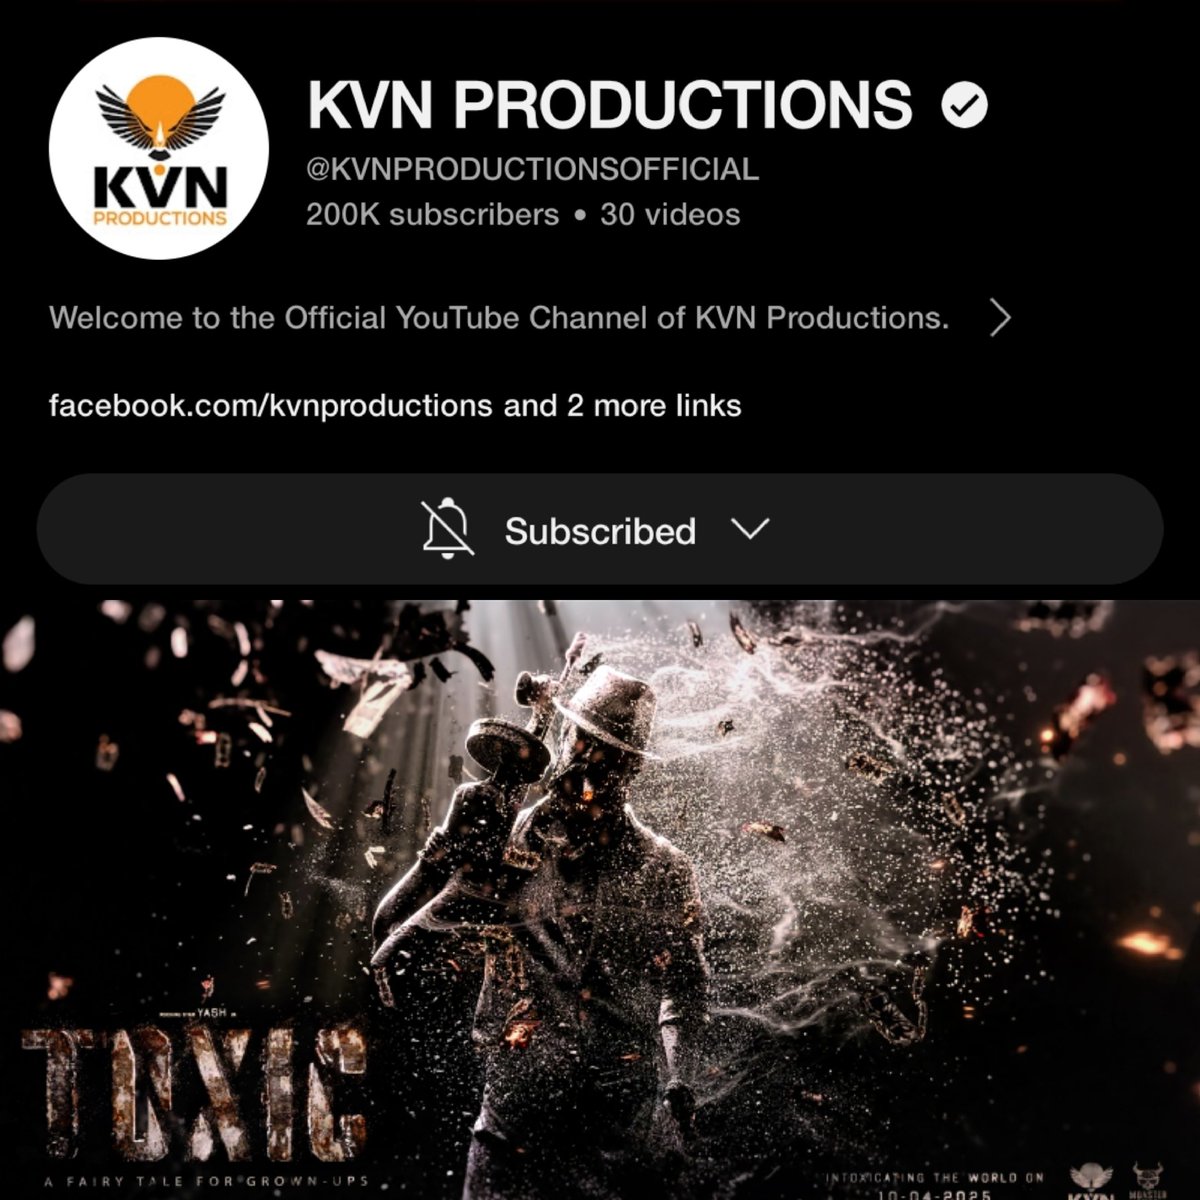 Our #ToxicTheMovie Co-Production House @KvnProductions Completed 200K Subscribers On YouTube. Congratulations, More To Come 😍🔥 #YashBOSS @TheNameIsYash @Toxic_themovie